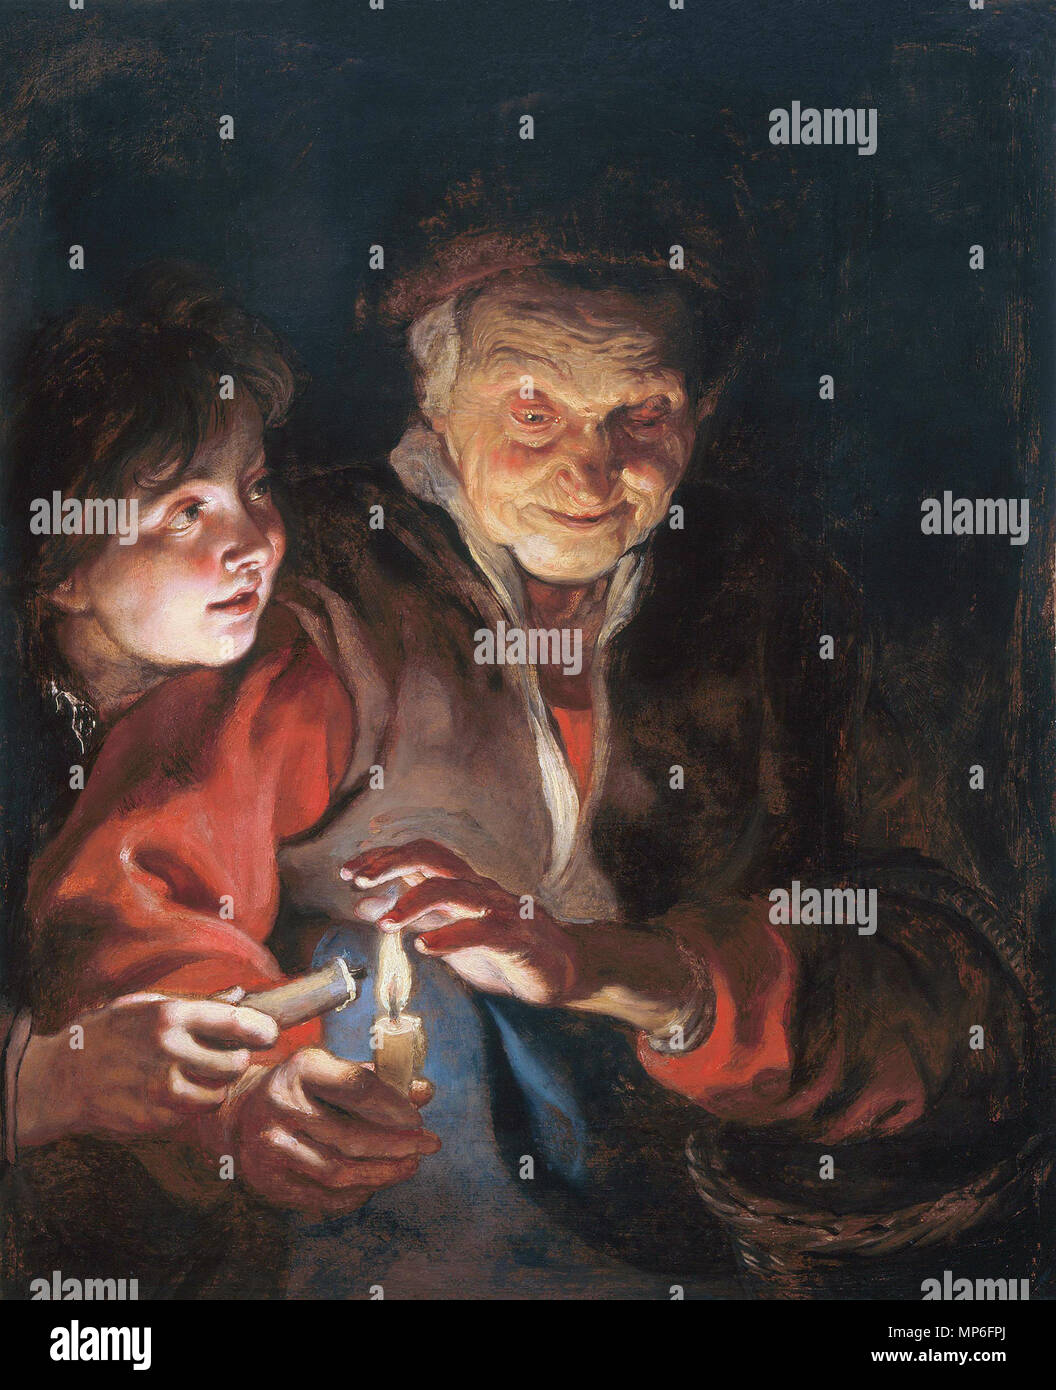 Old Woman and Boy with Candles *oil on panel *79 x 61 cm *circa 1616 - 1617   Old woman and boy with candles   between 1616 and 1617.   976 Peter Paul Rubens - Night Scene - WGA20423 Stock Photo